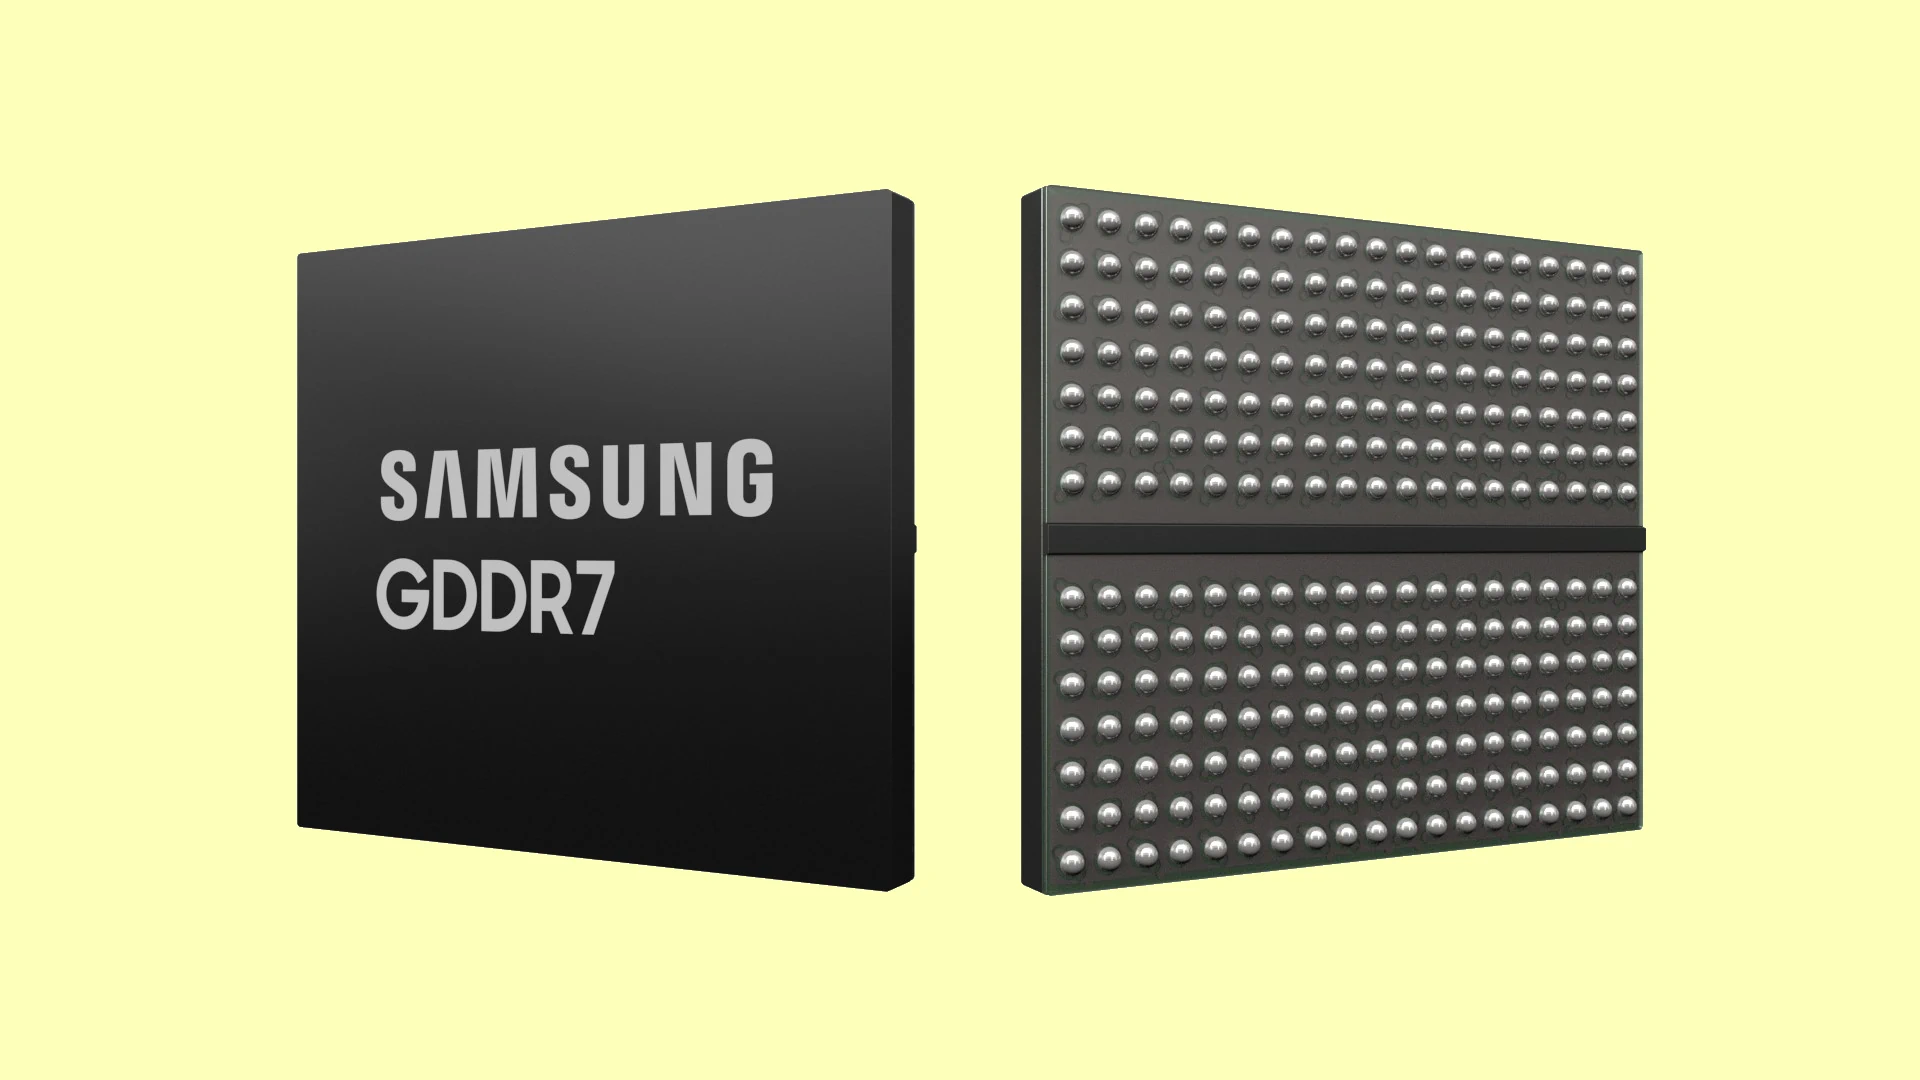 Samsung GDDR7 memory will be more than 50 percent faster in maximum data transfer than GDDR6X